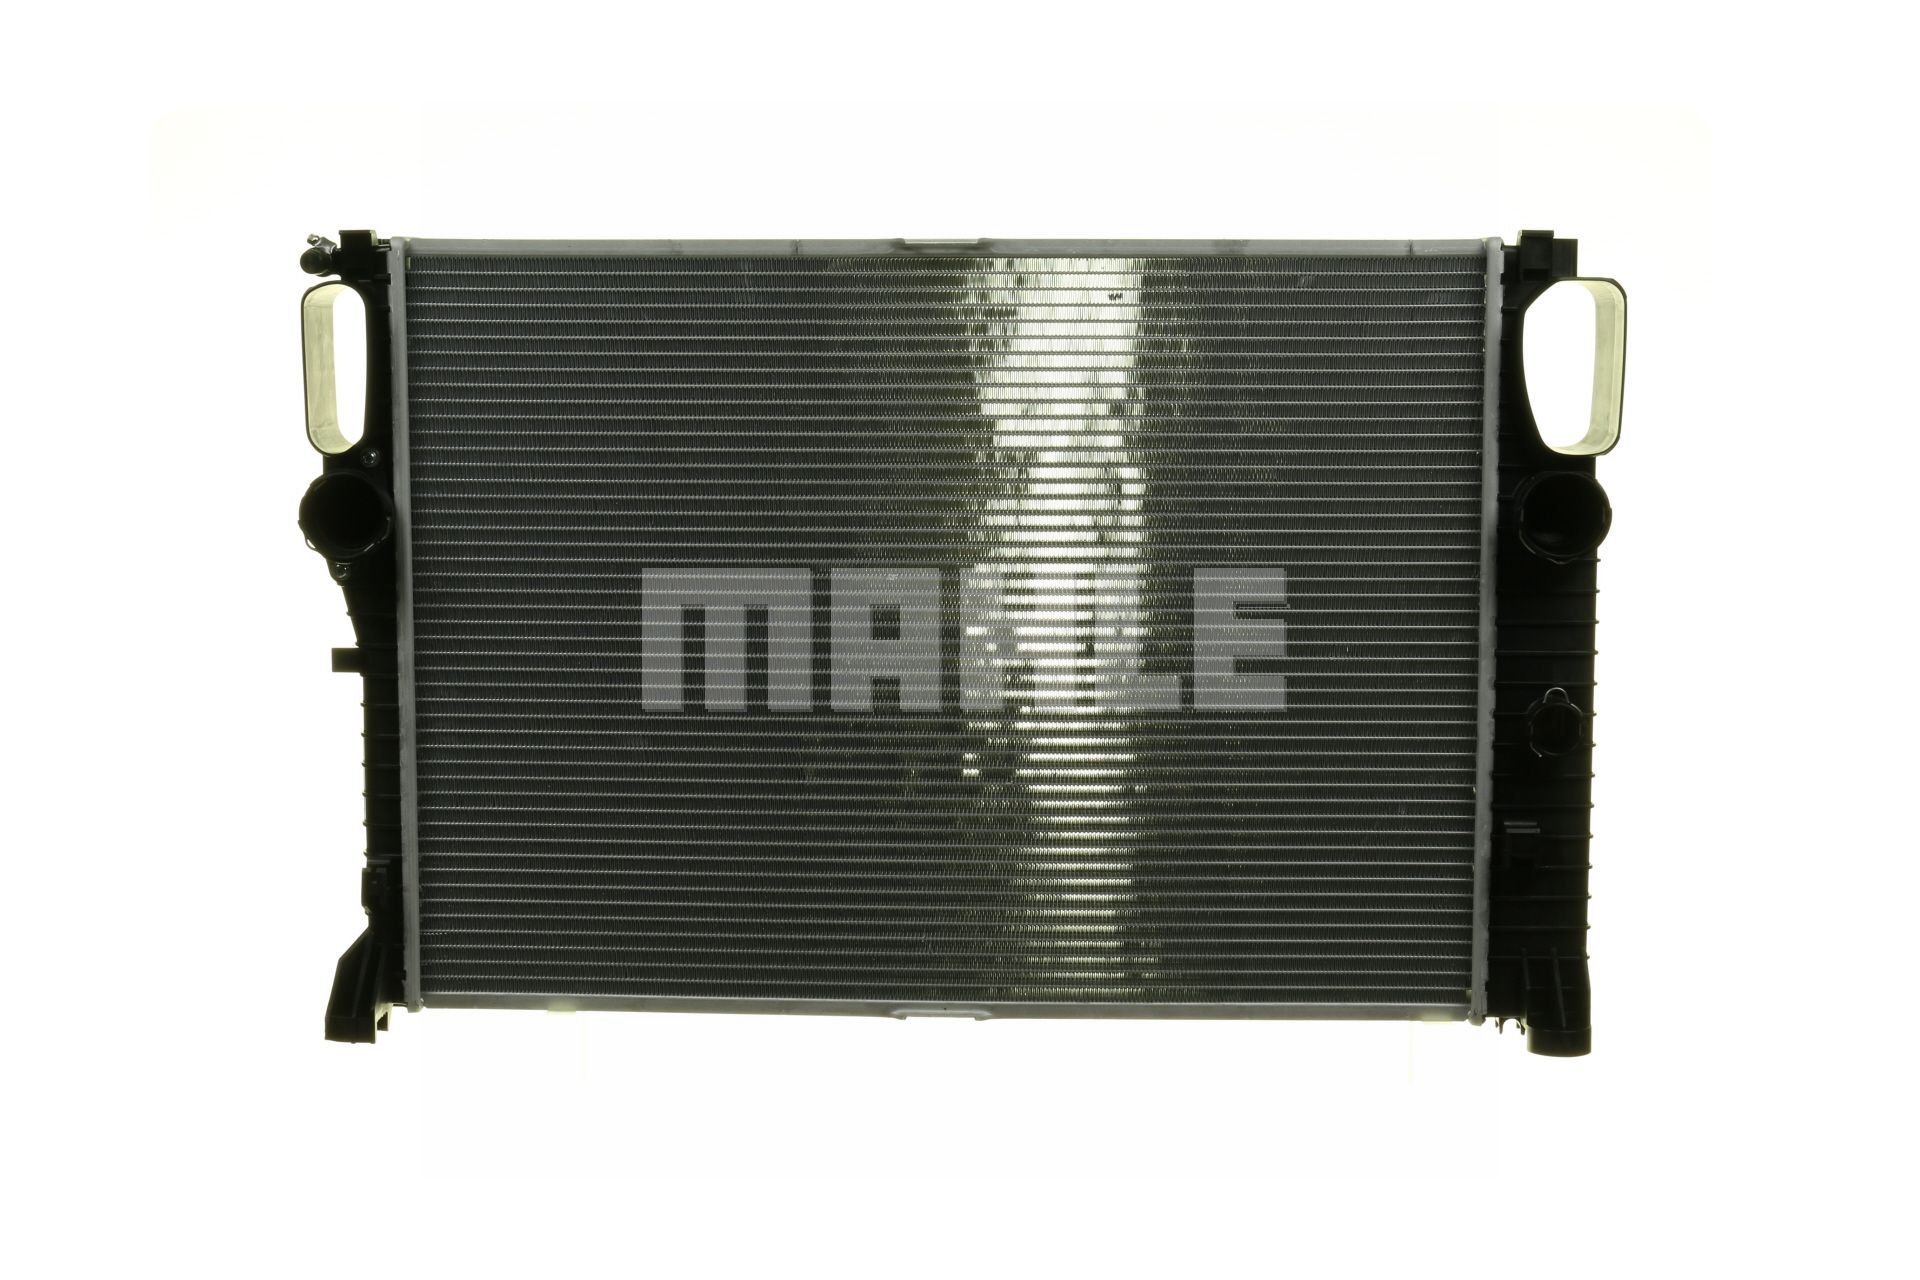 MAHLE ORIGINAL CR 1480 000S Engine radiator for vehicles with/without air conditioning, 640 x 459 x 38 mm, Automatic Transmission, Manual Transmission, Brazed cooling fins